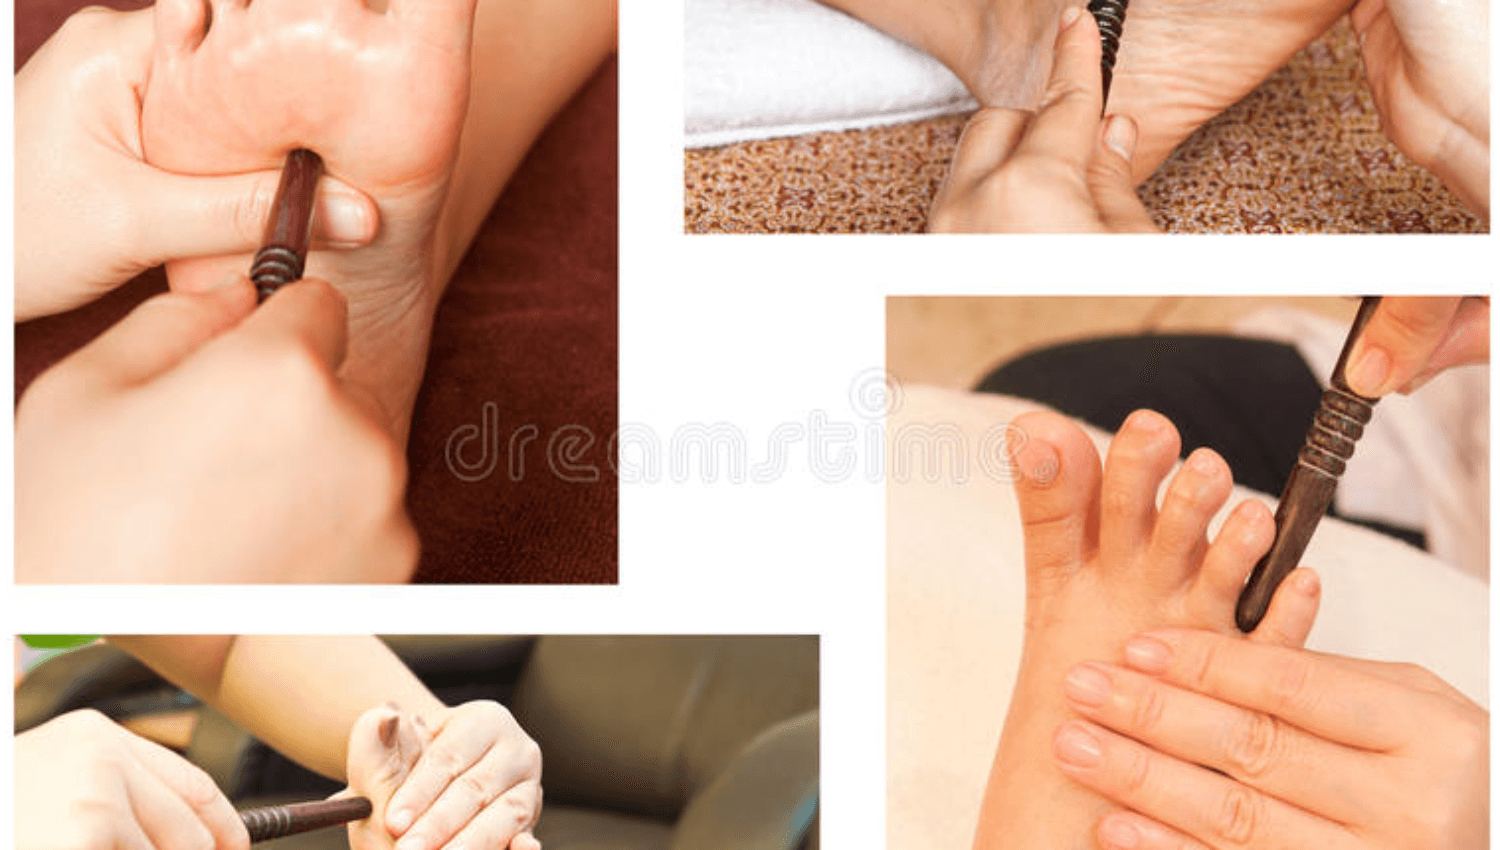 Image for Thai Foot Massage and Reflexology - Massage and Reflexology to the lower legs and feet using my hands and a wooden stick.